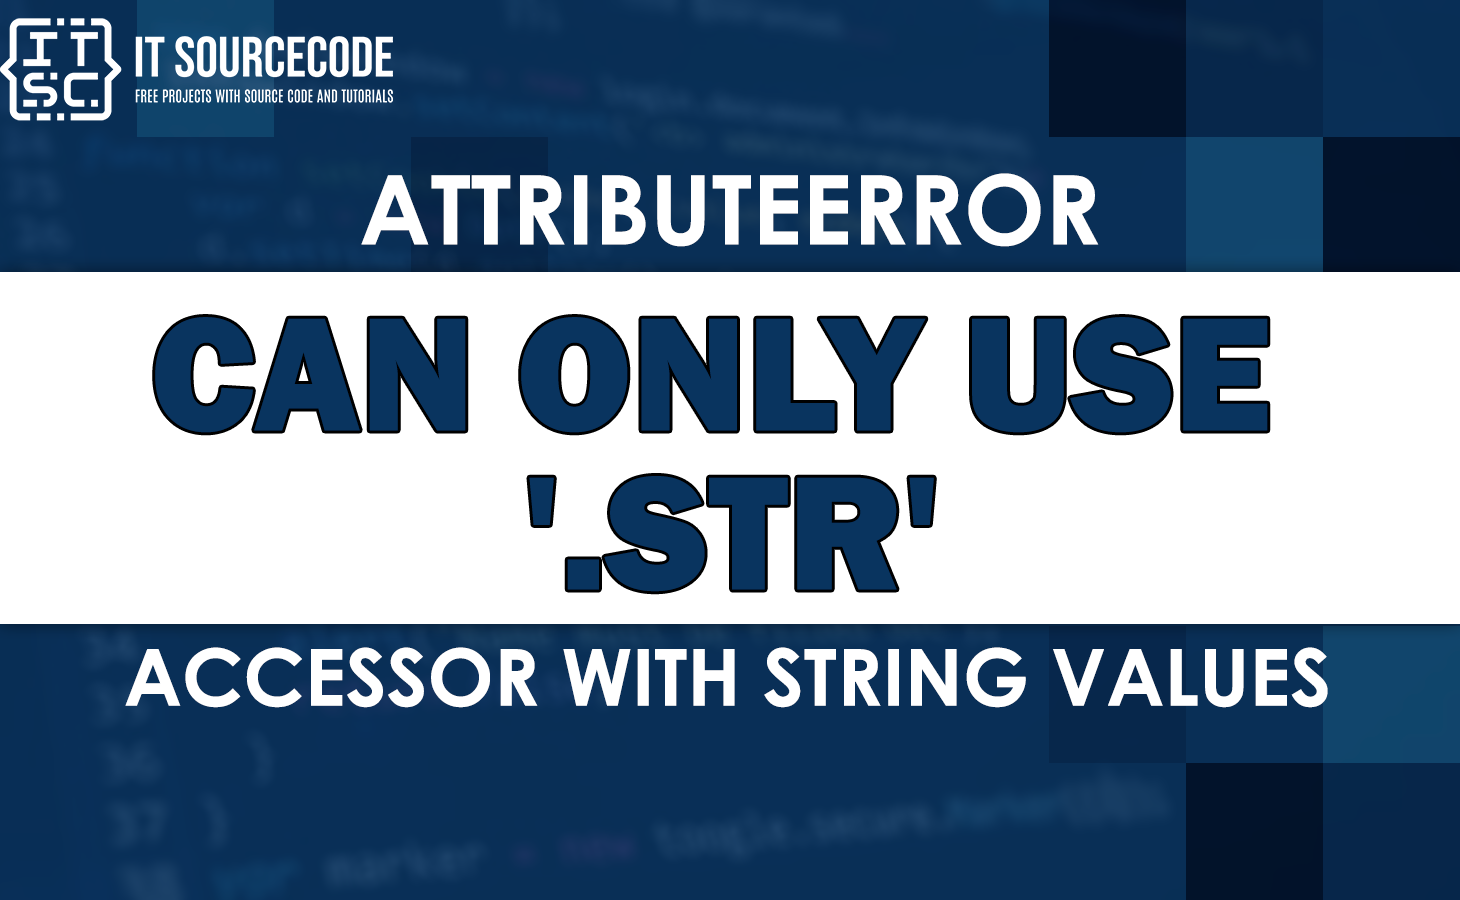 Attributeerror can only use str accessor with string values